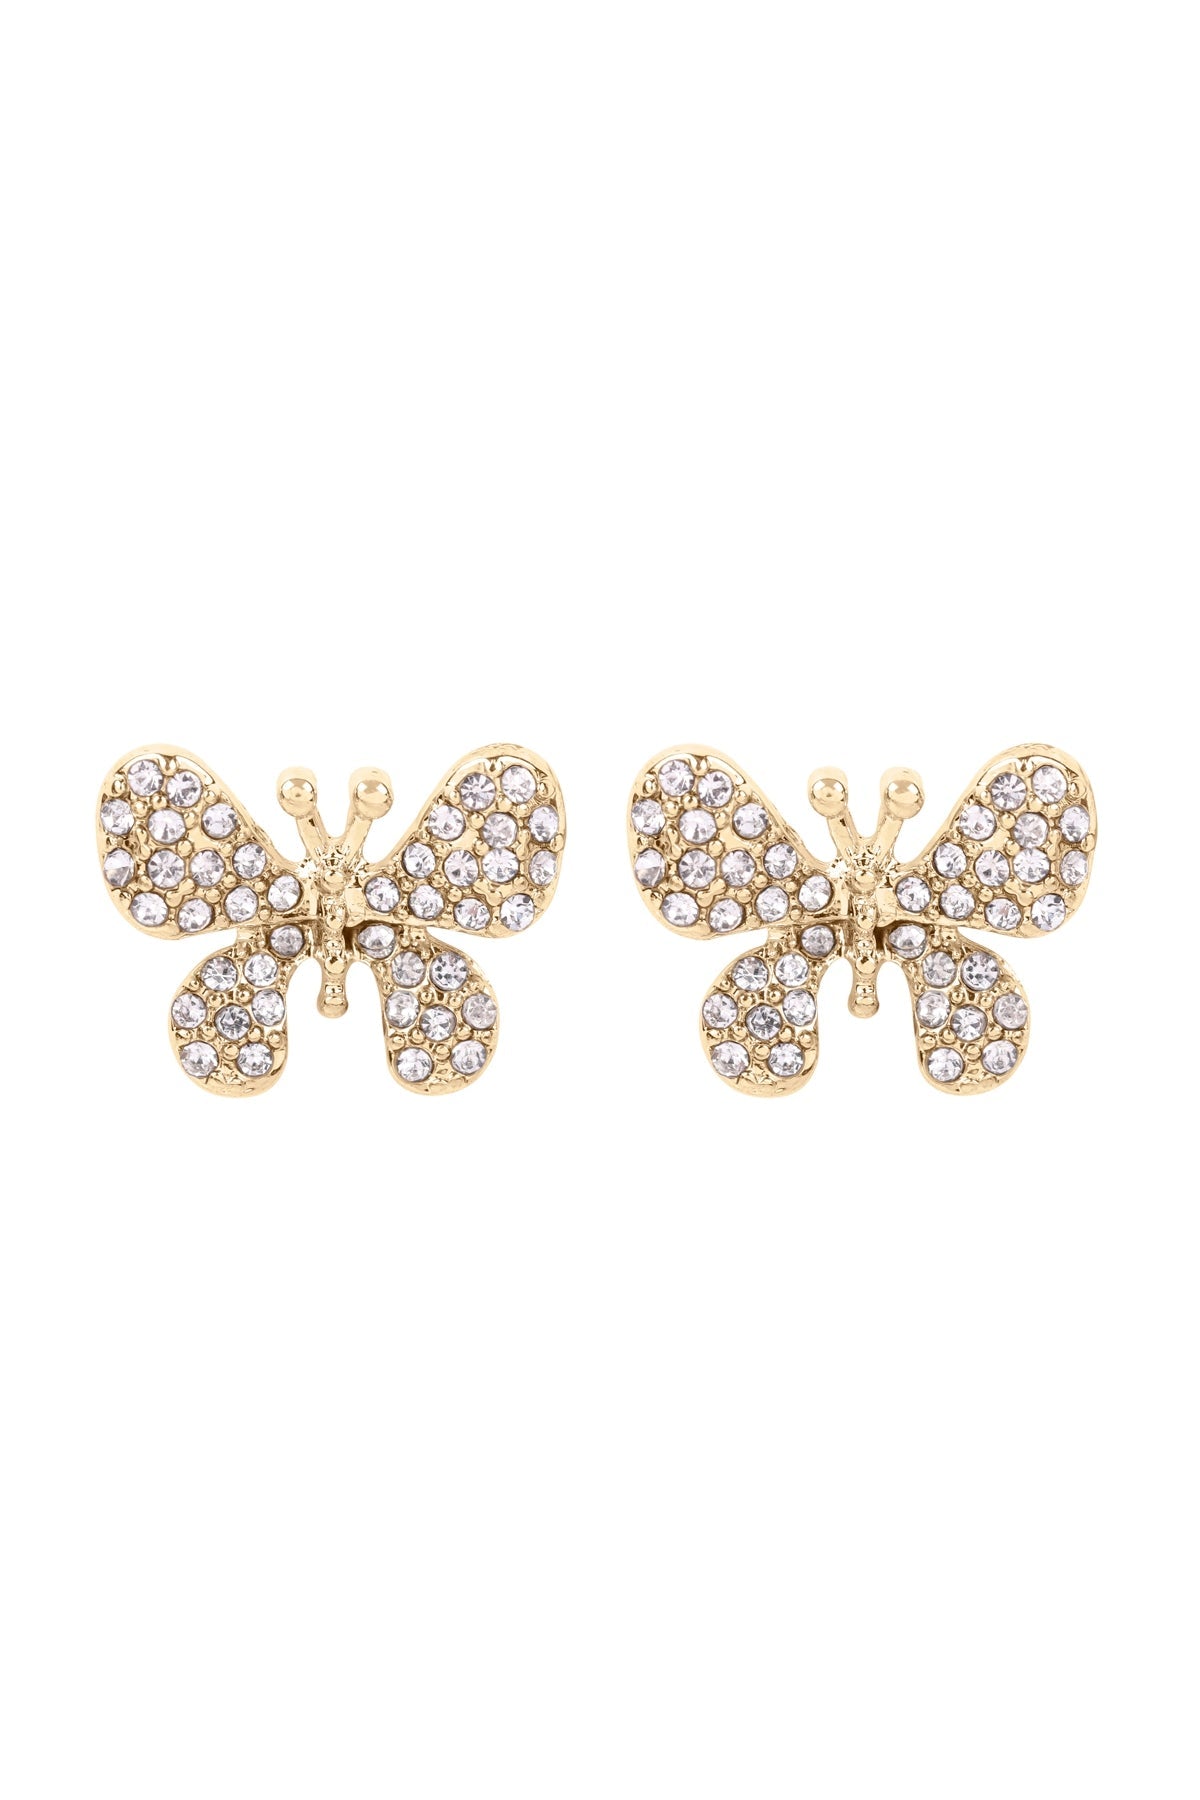 MEDIUM BUTTERFLY PAVE STUD EARRINGS (NOW $1.00 ONLY!)